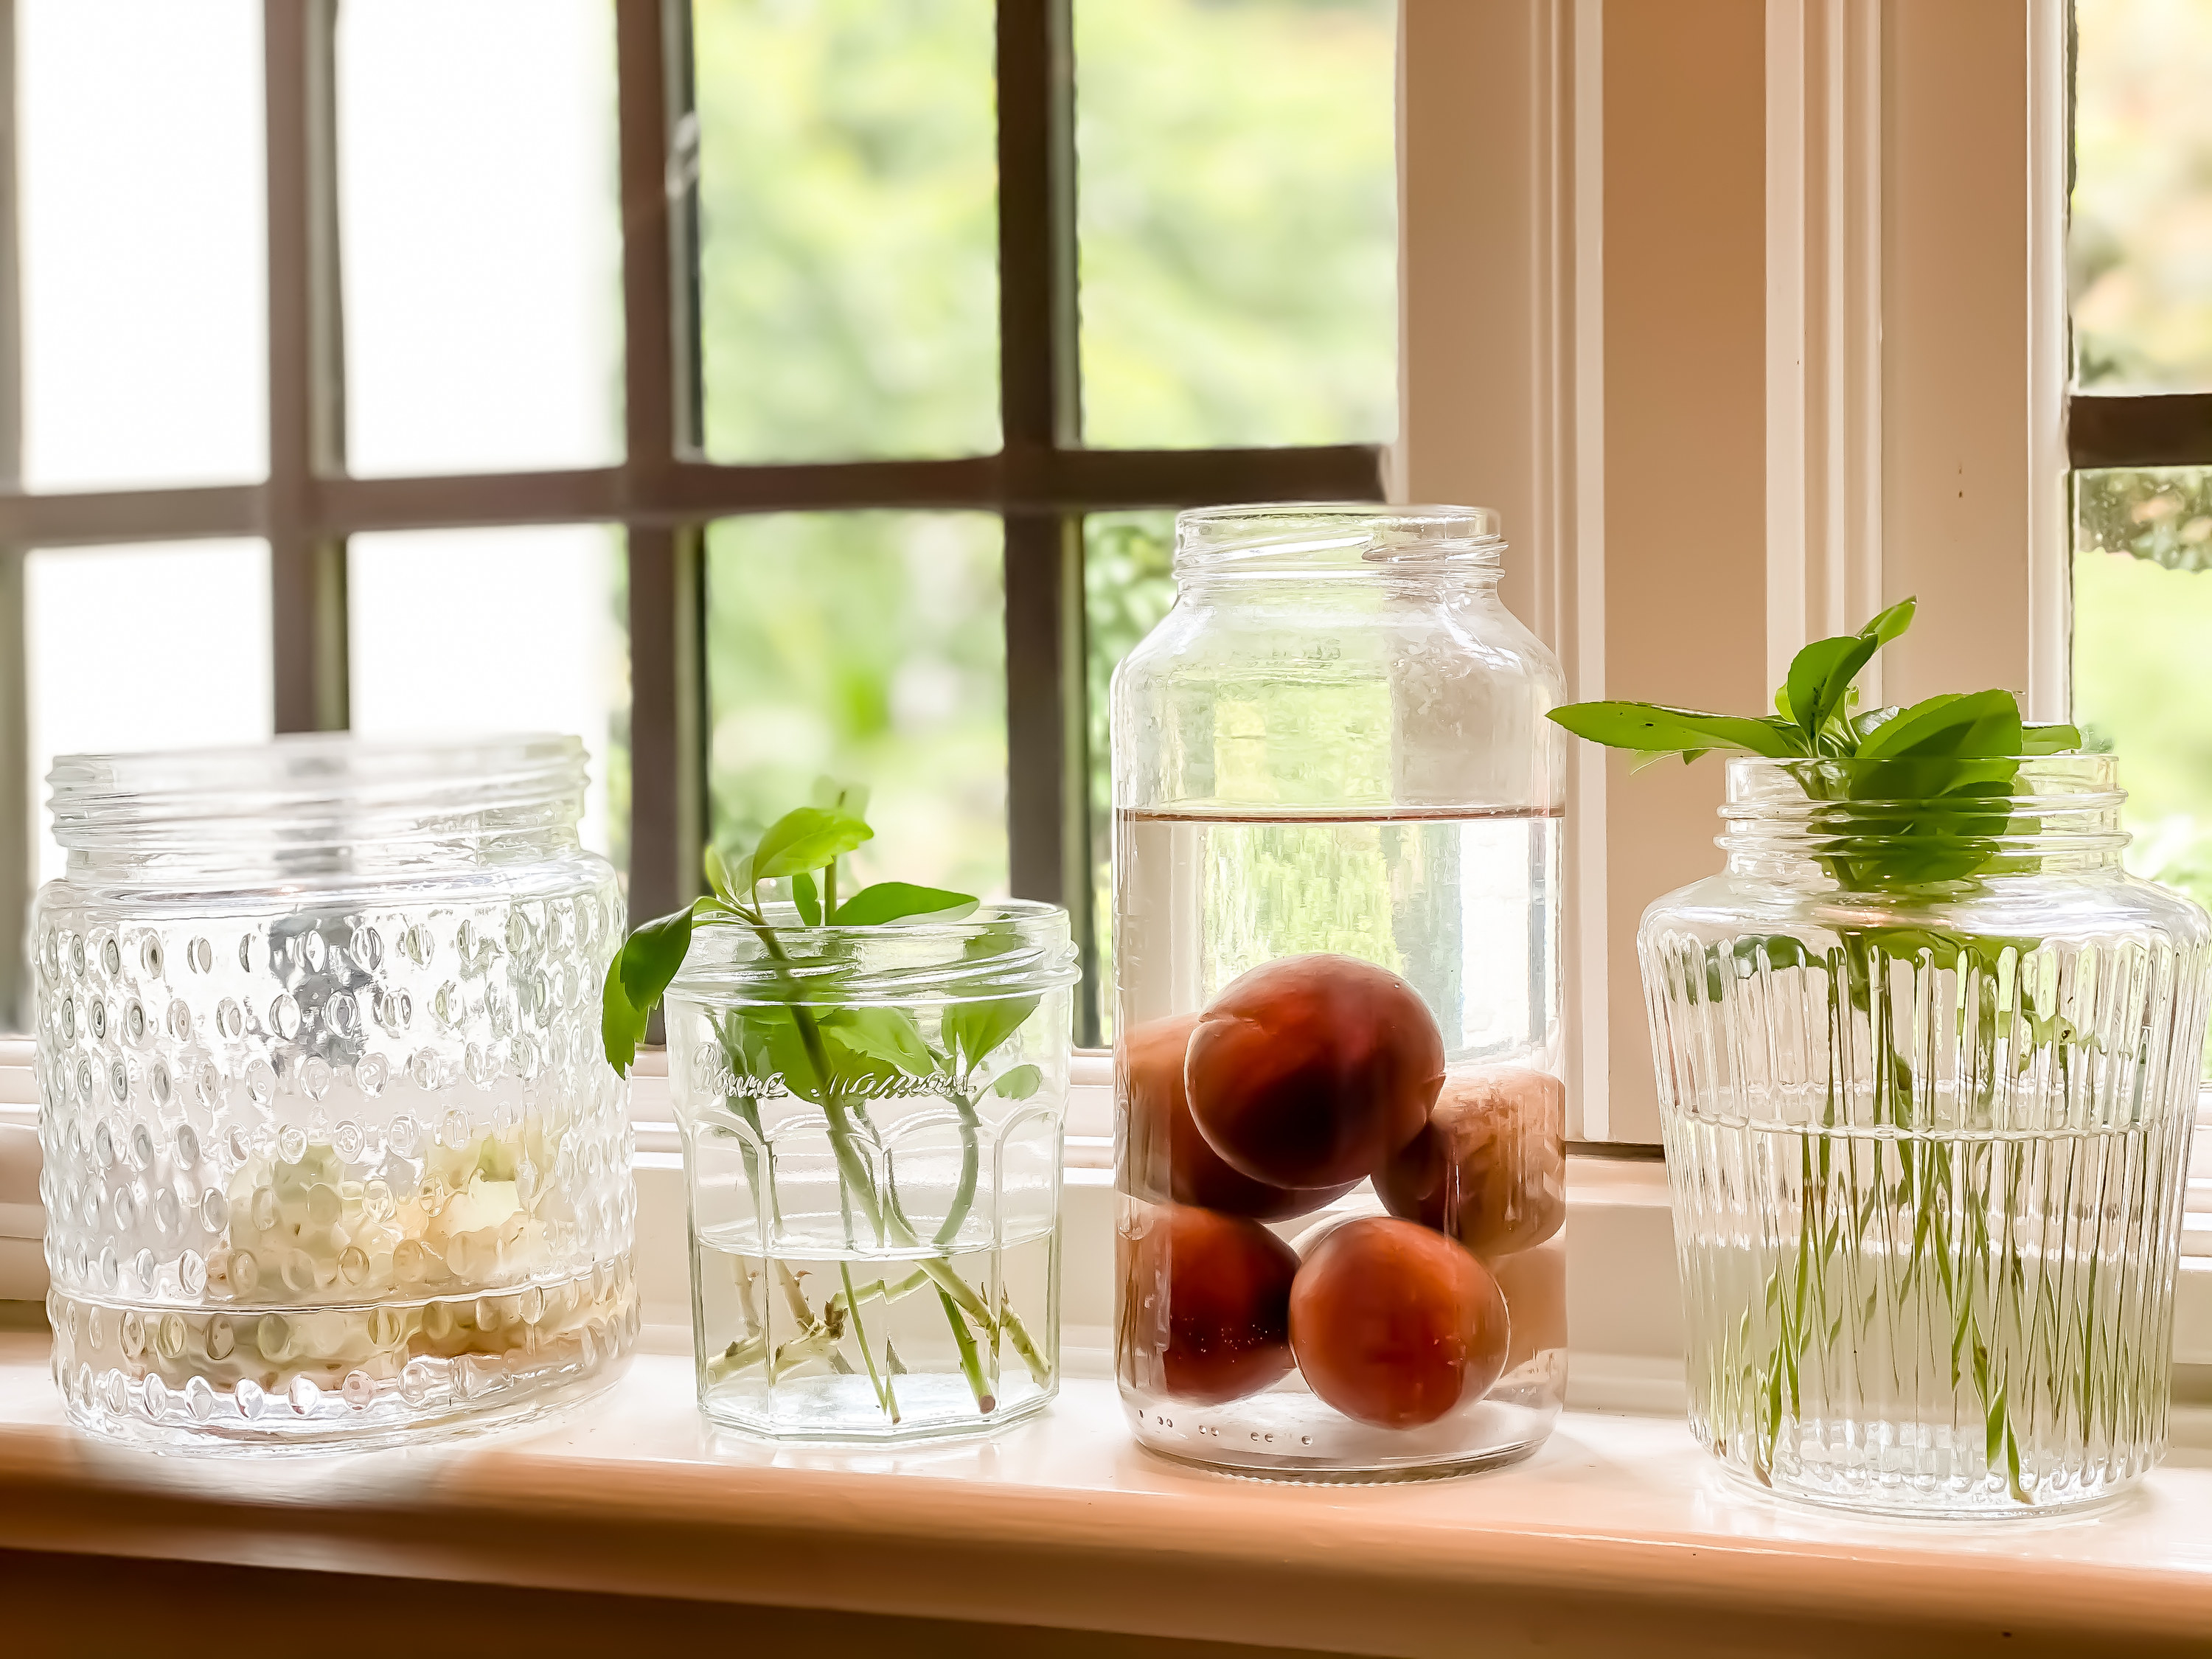 seeds, plant stems, and regrowing lettuce scraps in glass jars of water